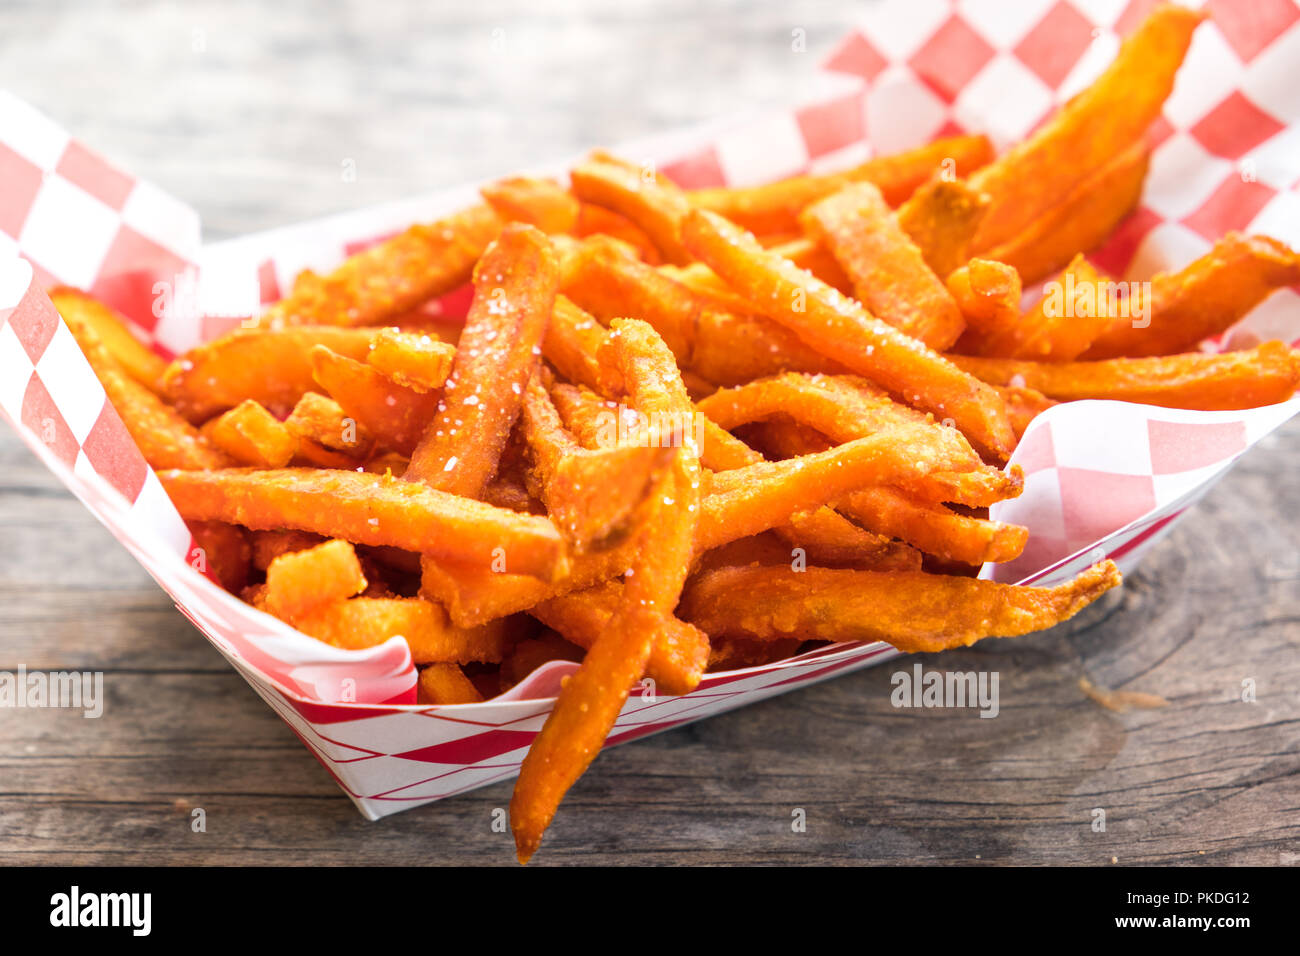 Paper basket of sweet potato fries with salt on rustic wooden table Stock Photo